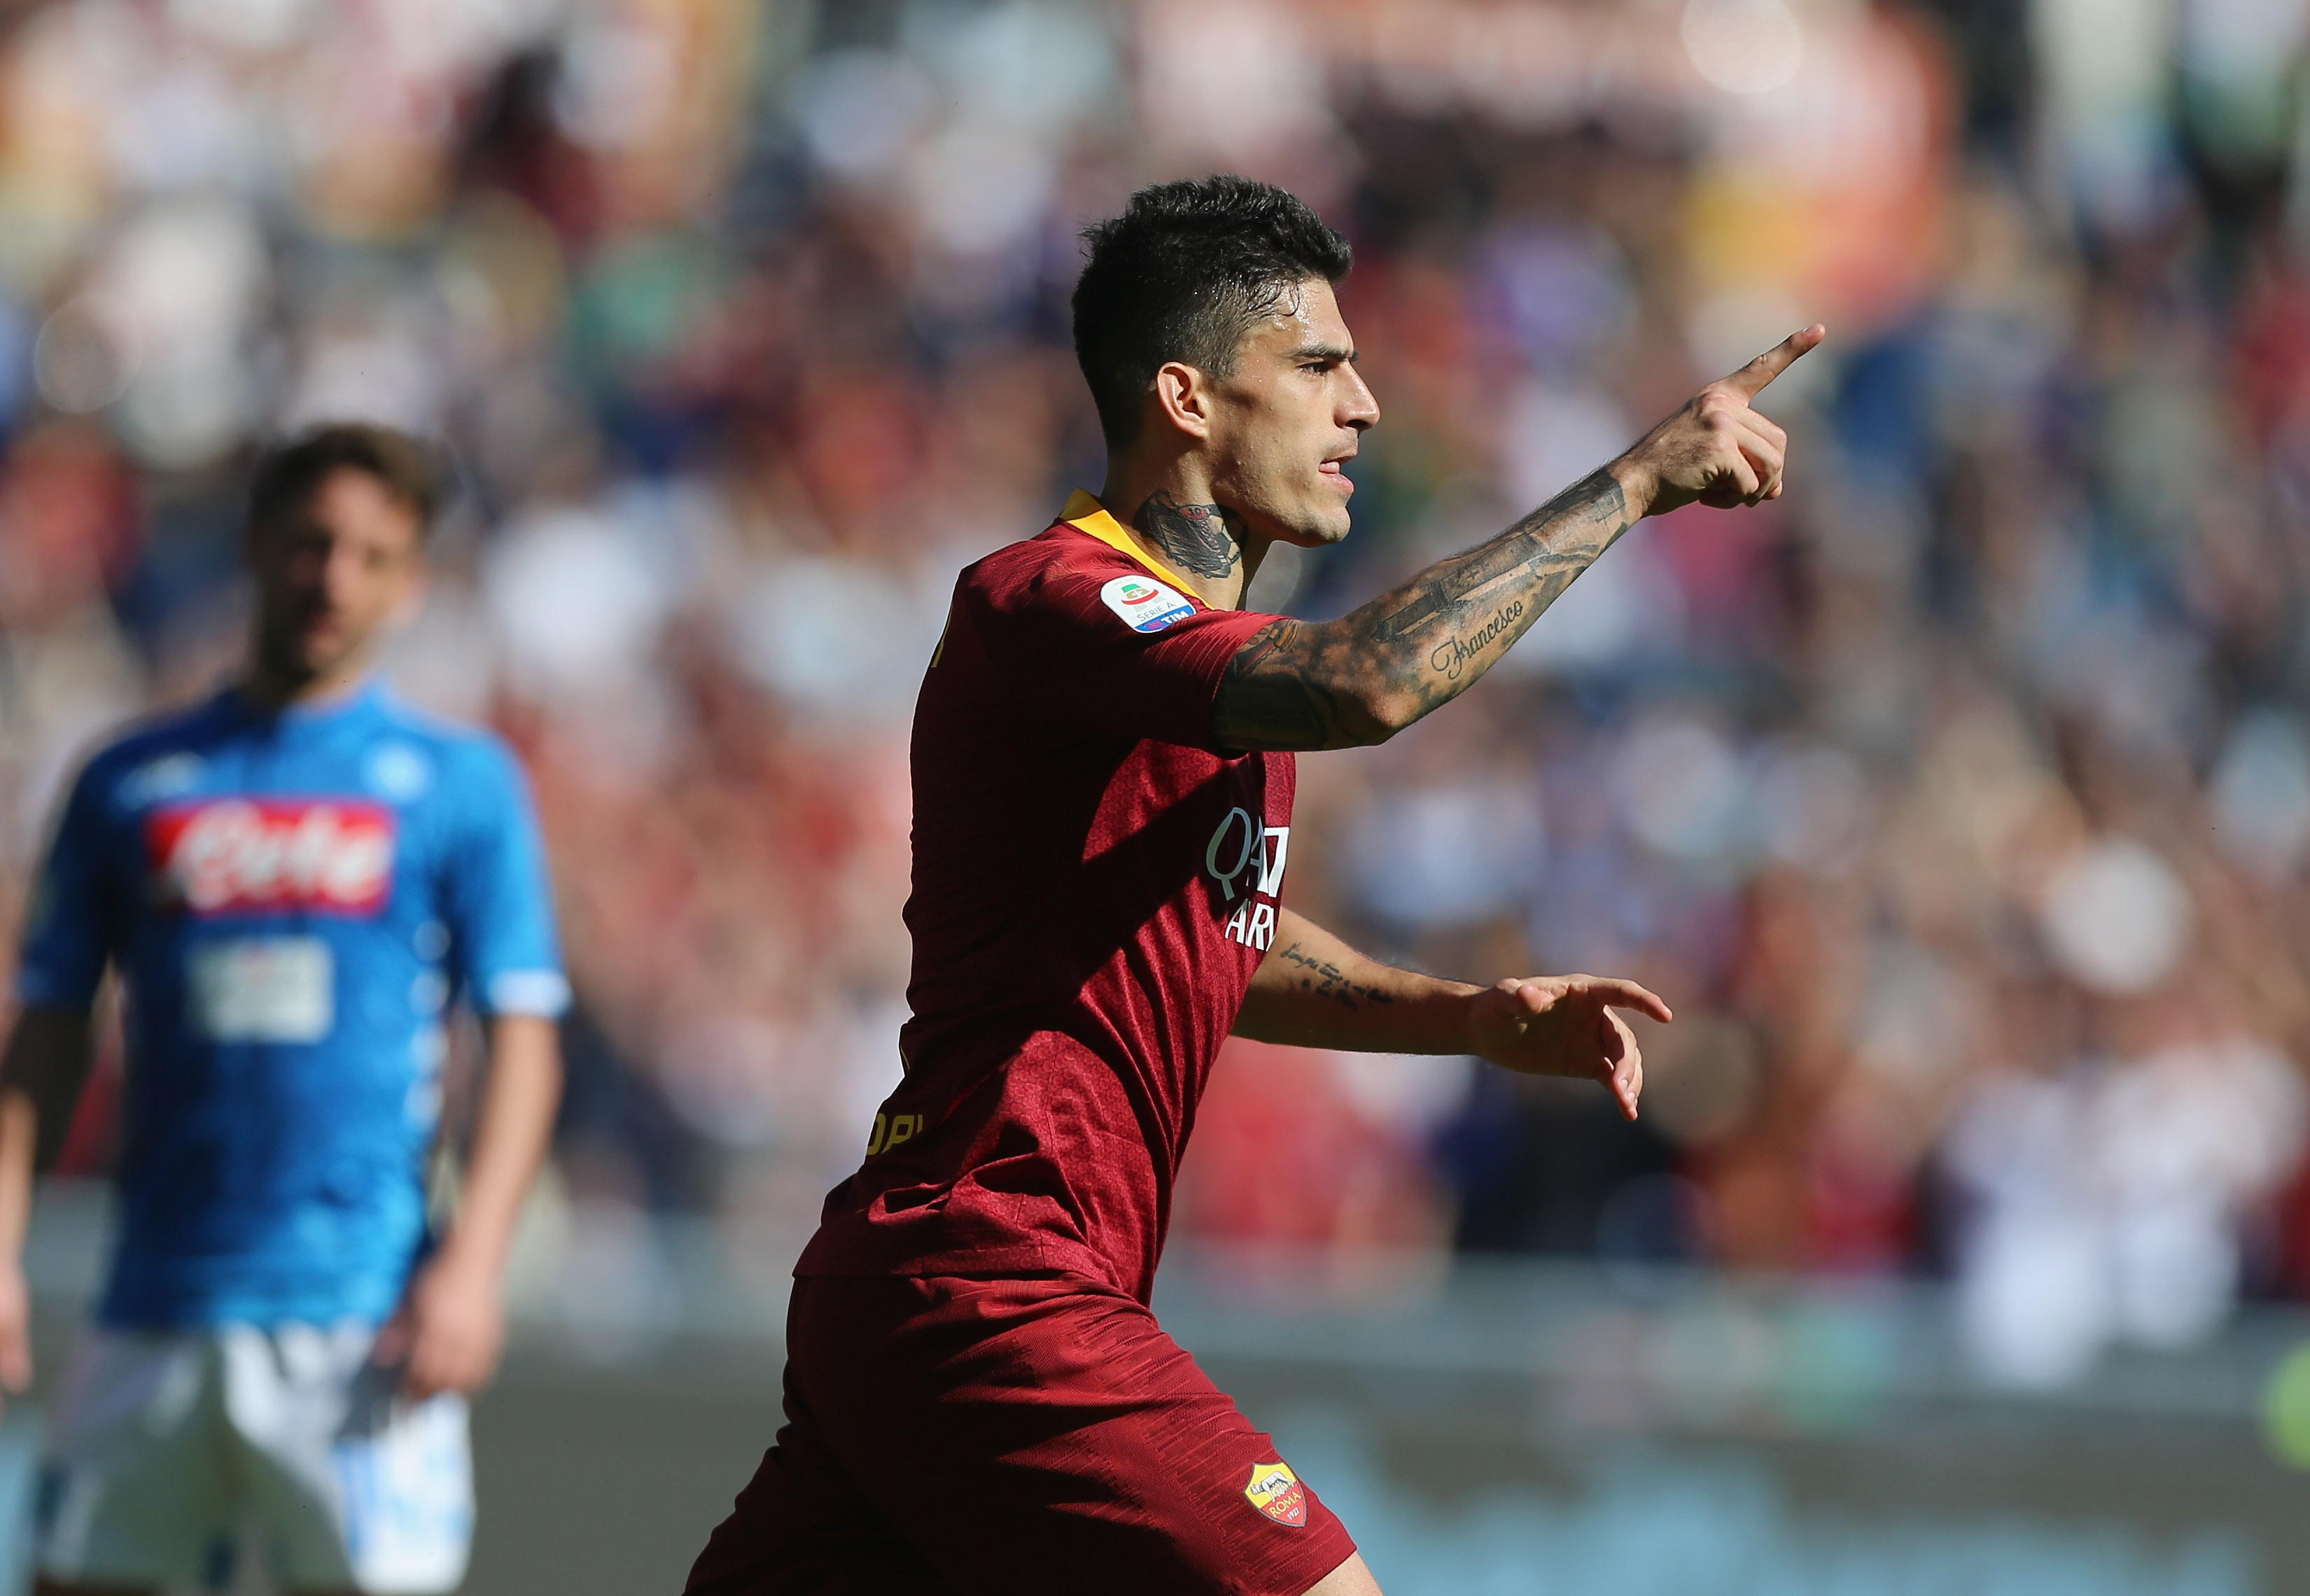 ROME, ITALY - MARCH 31:  Diego Perotti of AS Roma celebrates after scoring the team's first goal from penalty spot during the Serie A match between AS Roma and SSC Napoli at Stadio Olimpico on March 31, 2019 in Rome, Italy.  (Photo by Paolo Bruno/Getty Images)